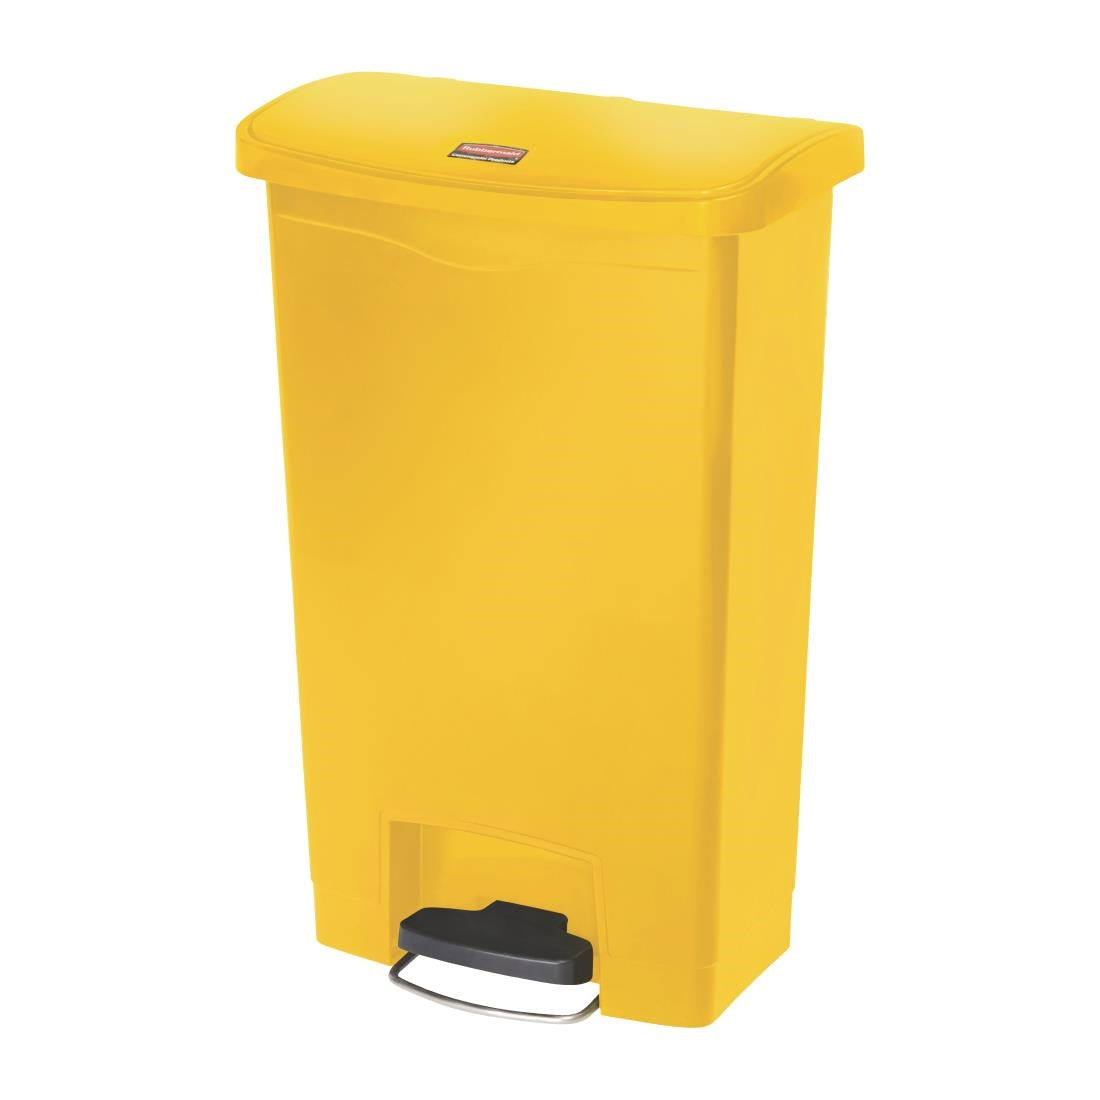 CW585 Rubbermaid Slim Jim Front Step-On Pedal Bin Yellow 50Ltr JD Catering Equipment Solutions Ltd